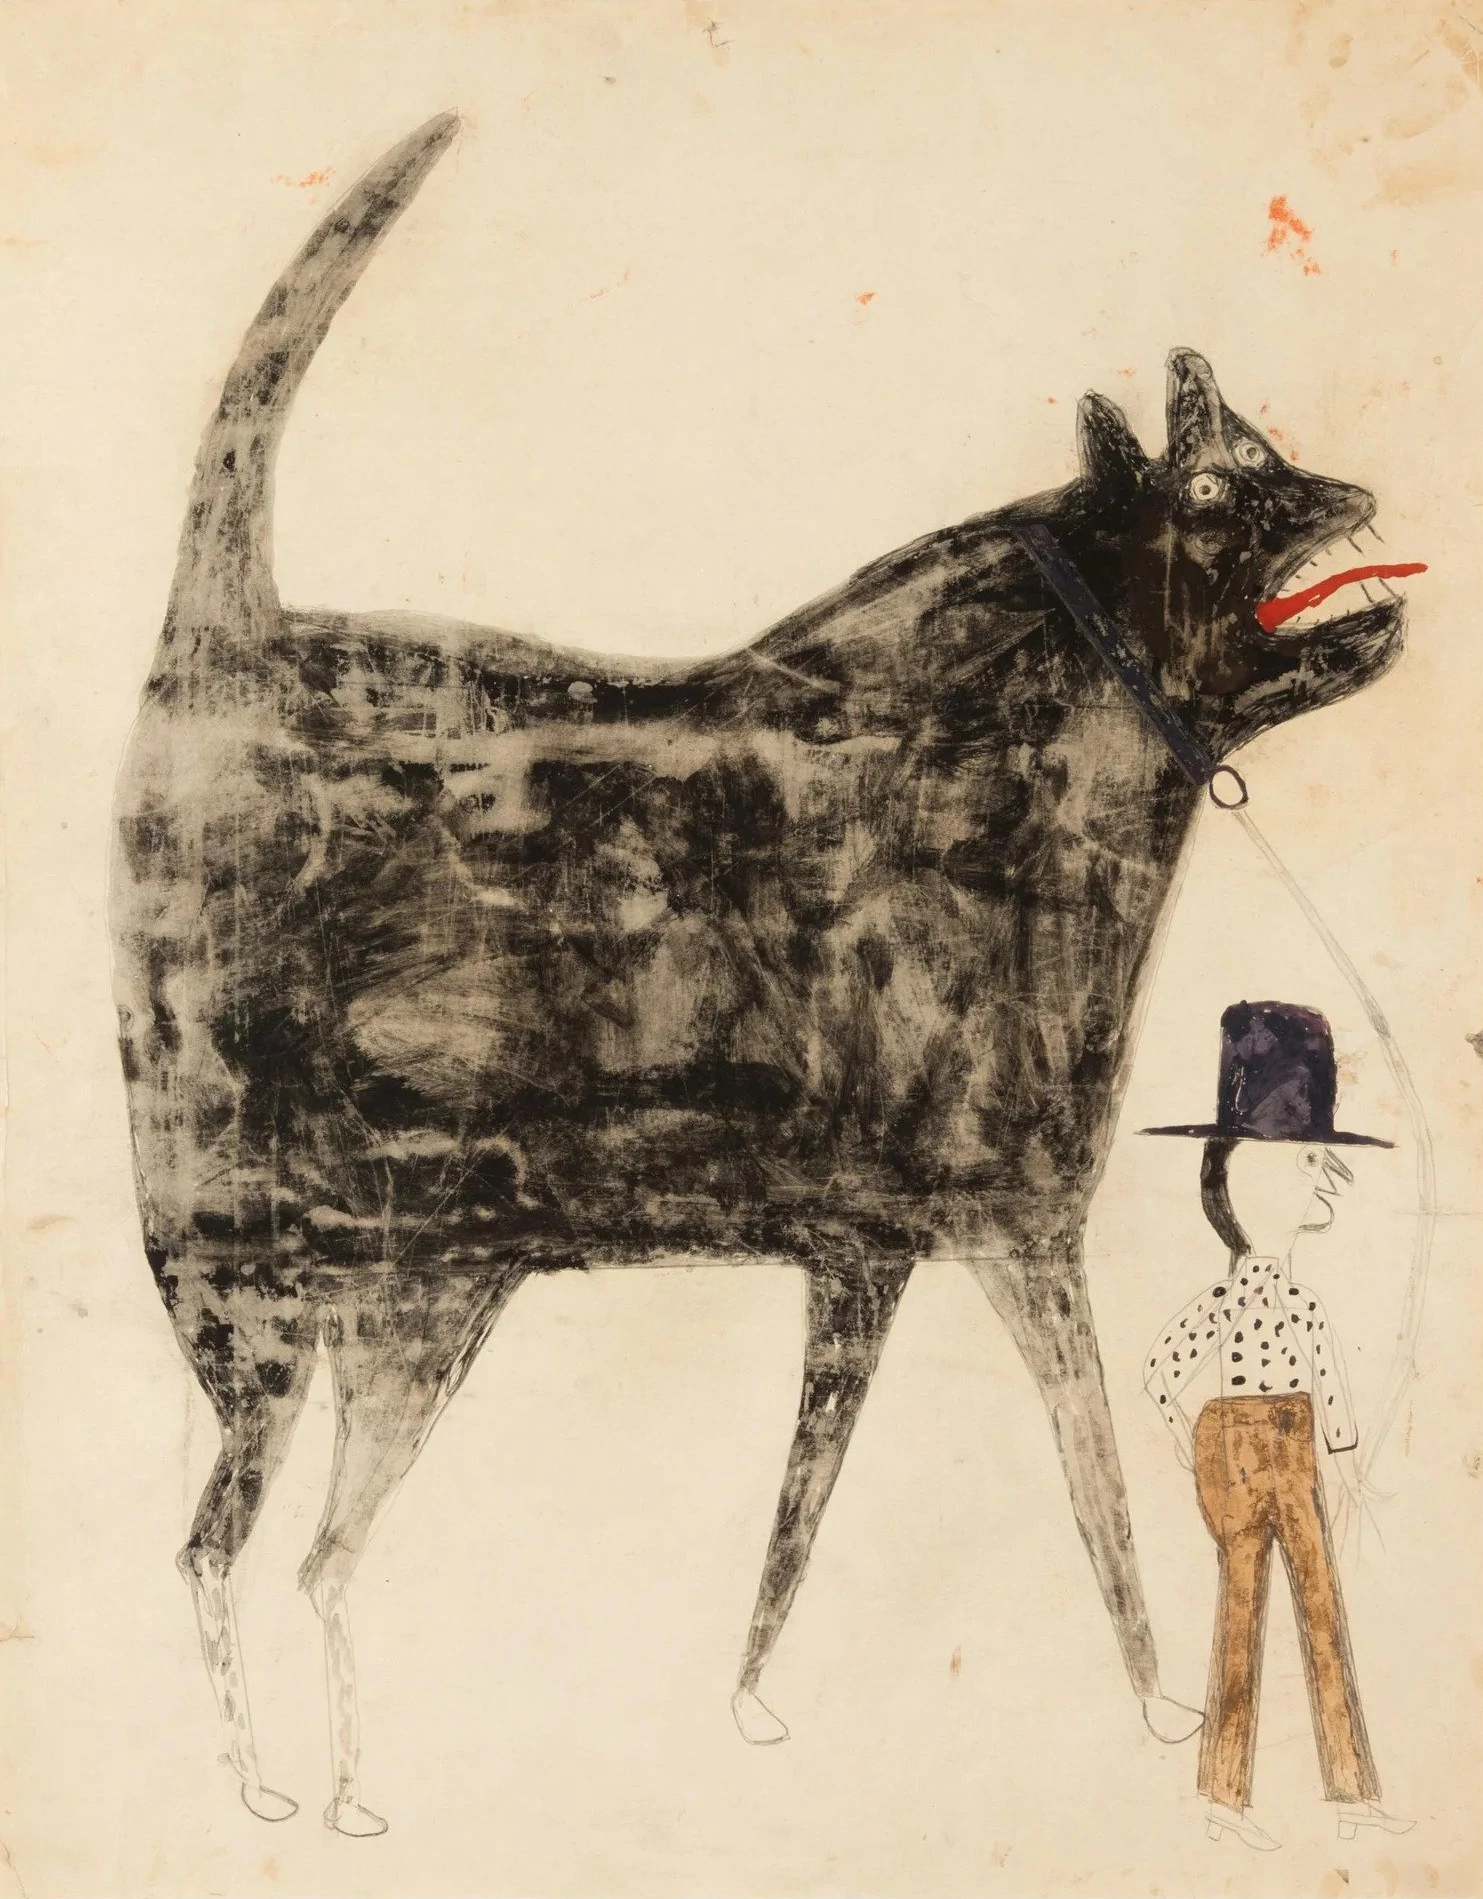 Bill Traylor, The Artists